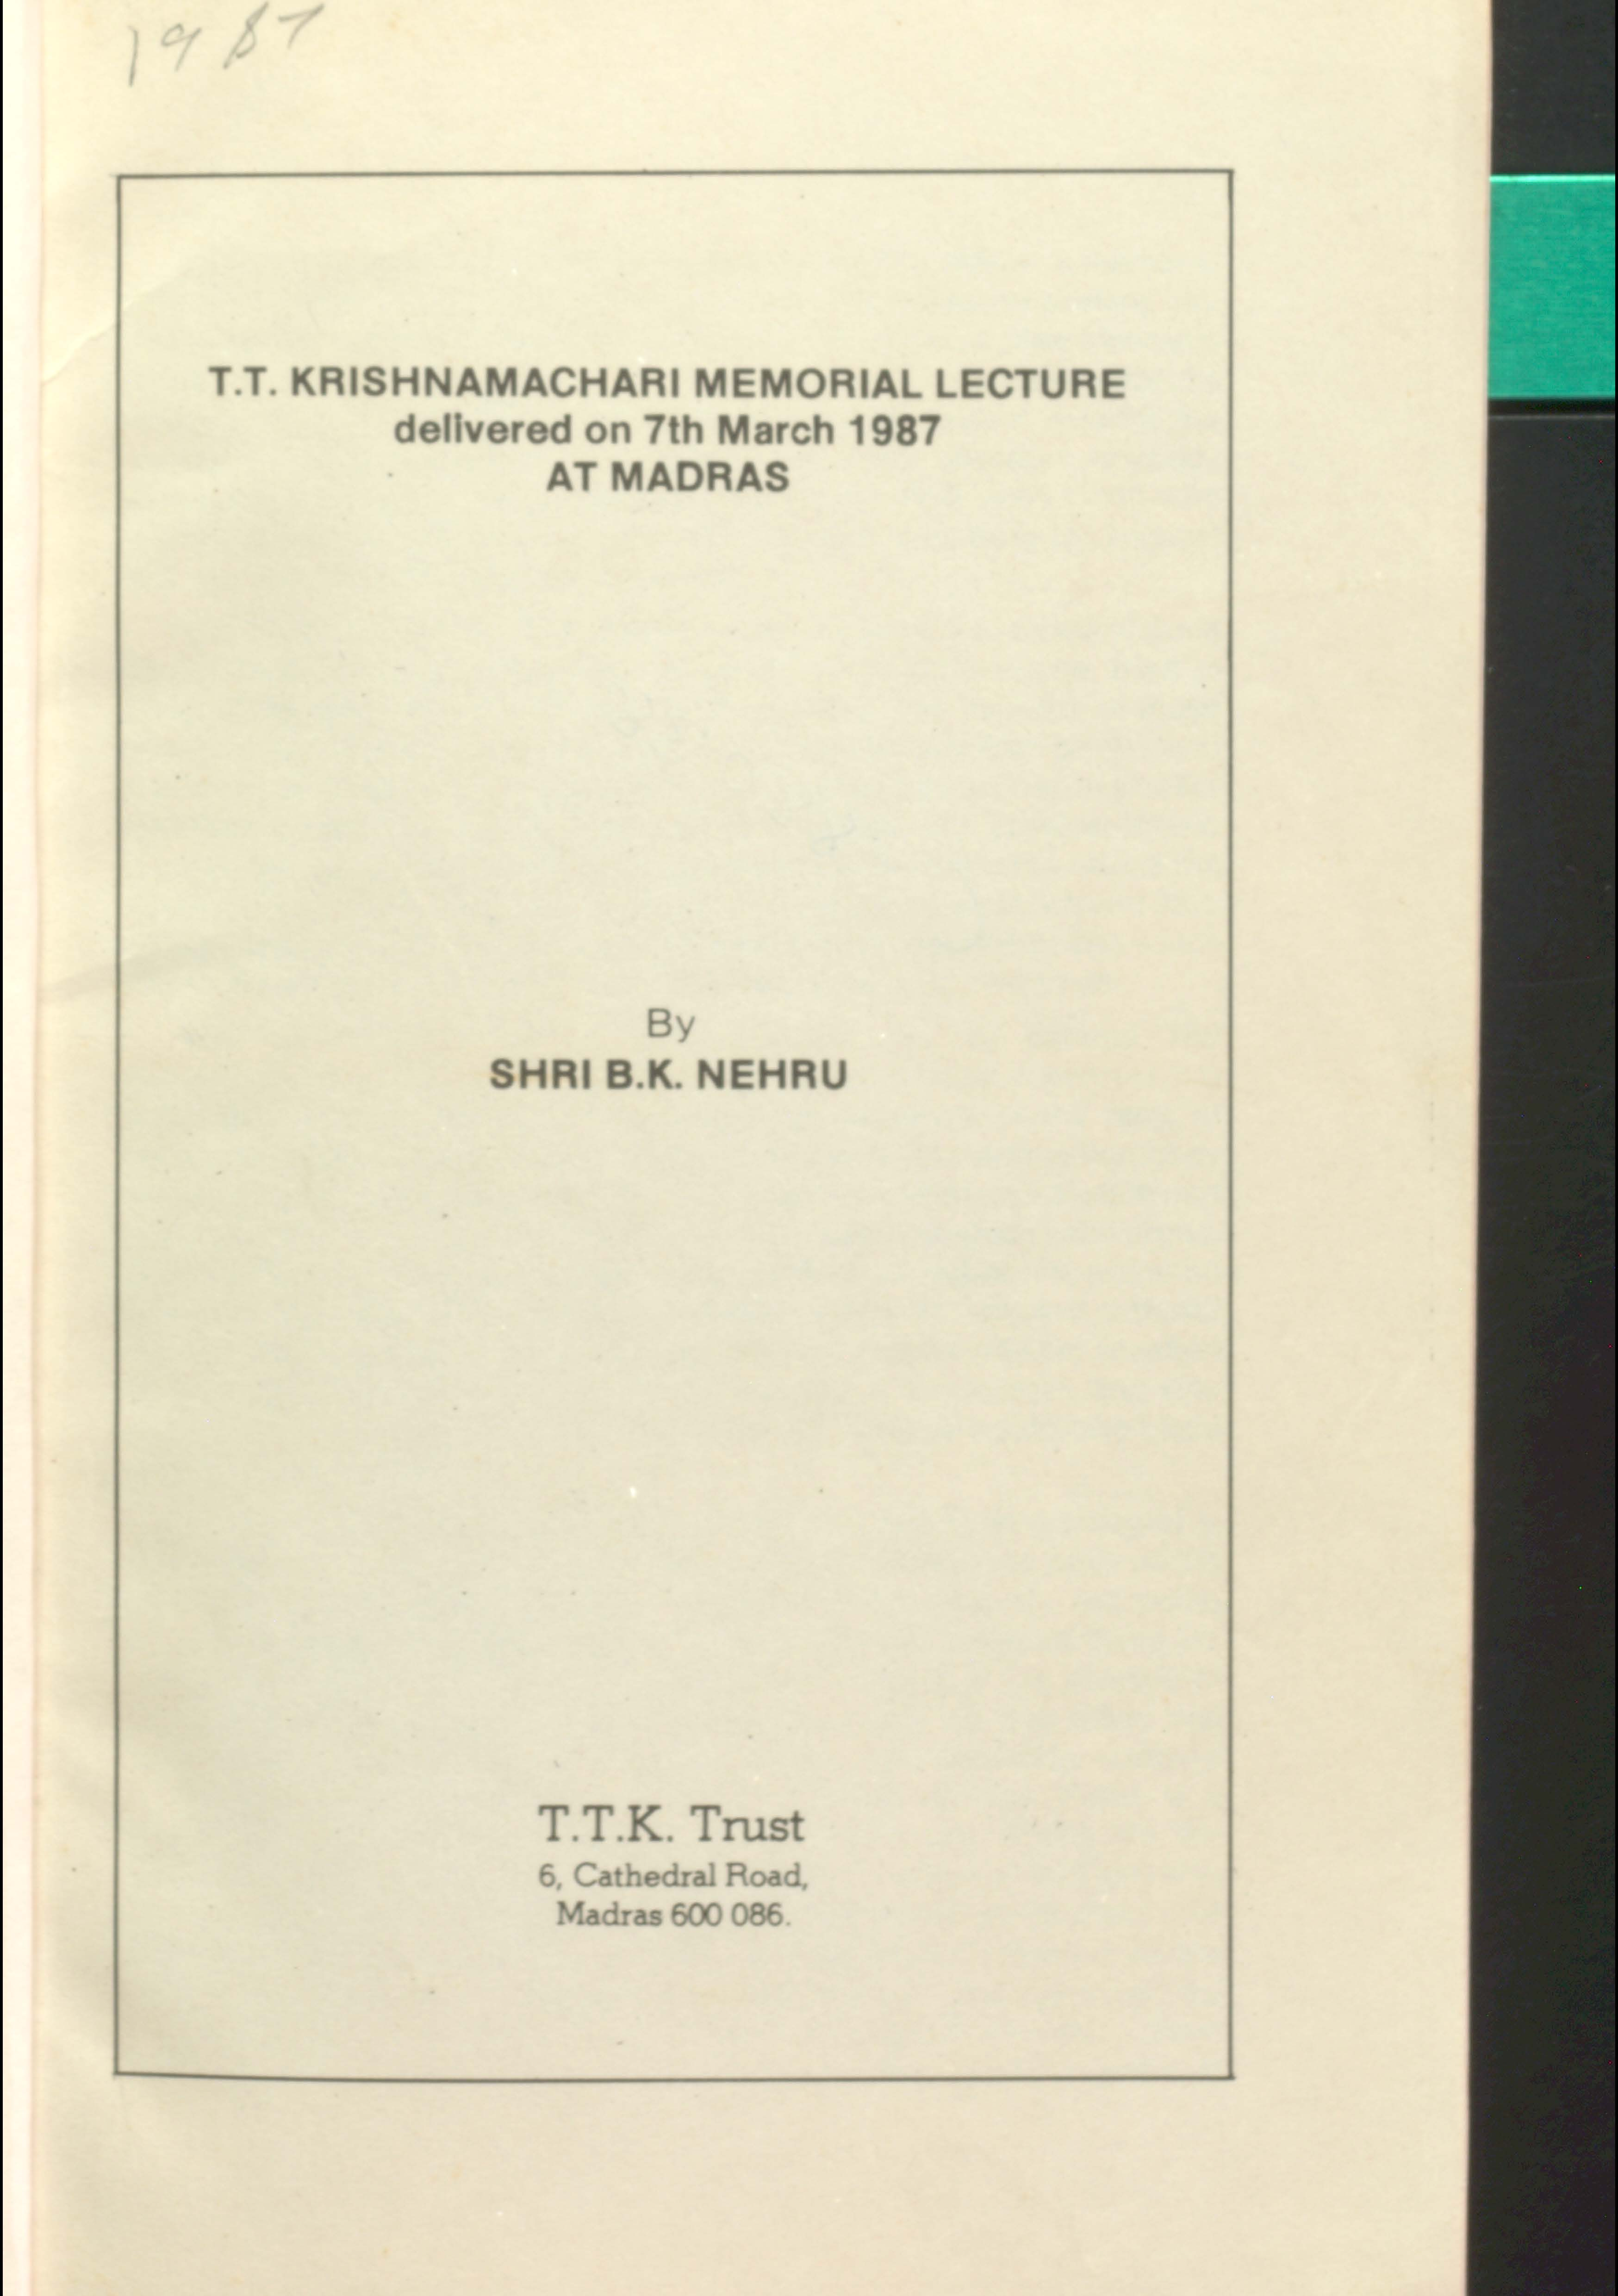 T.T. krishnamachri memorial lecture delivered on 7th march 1987 at madras 